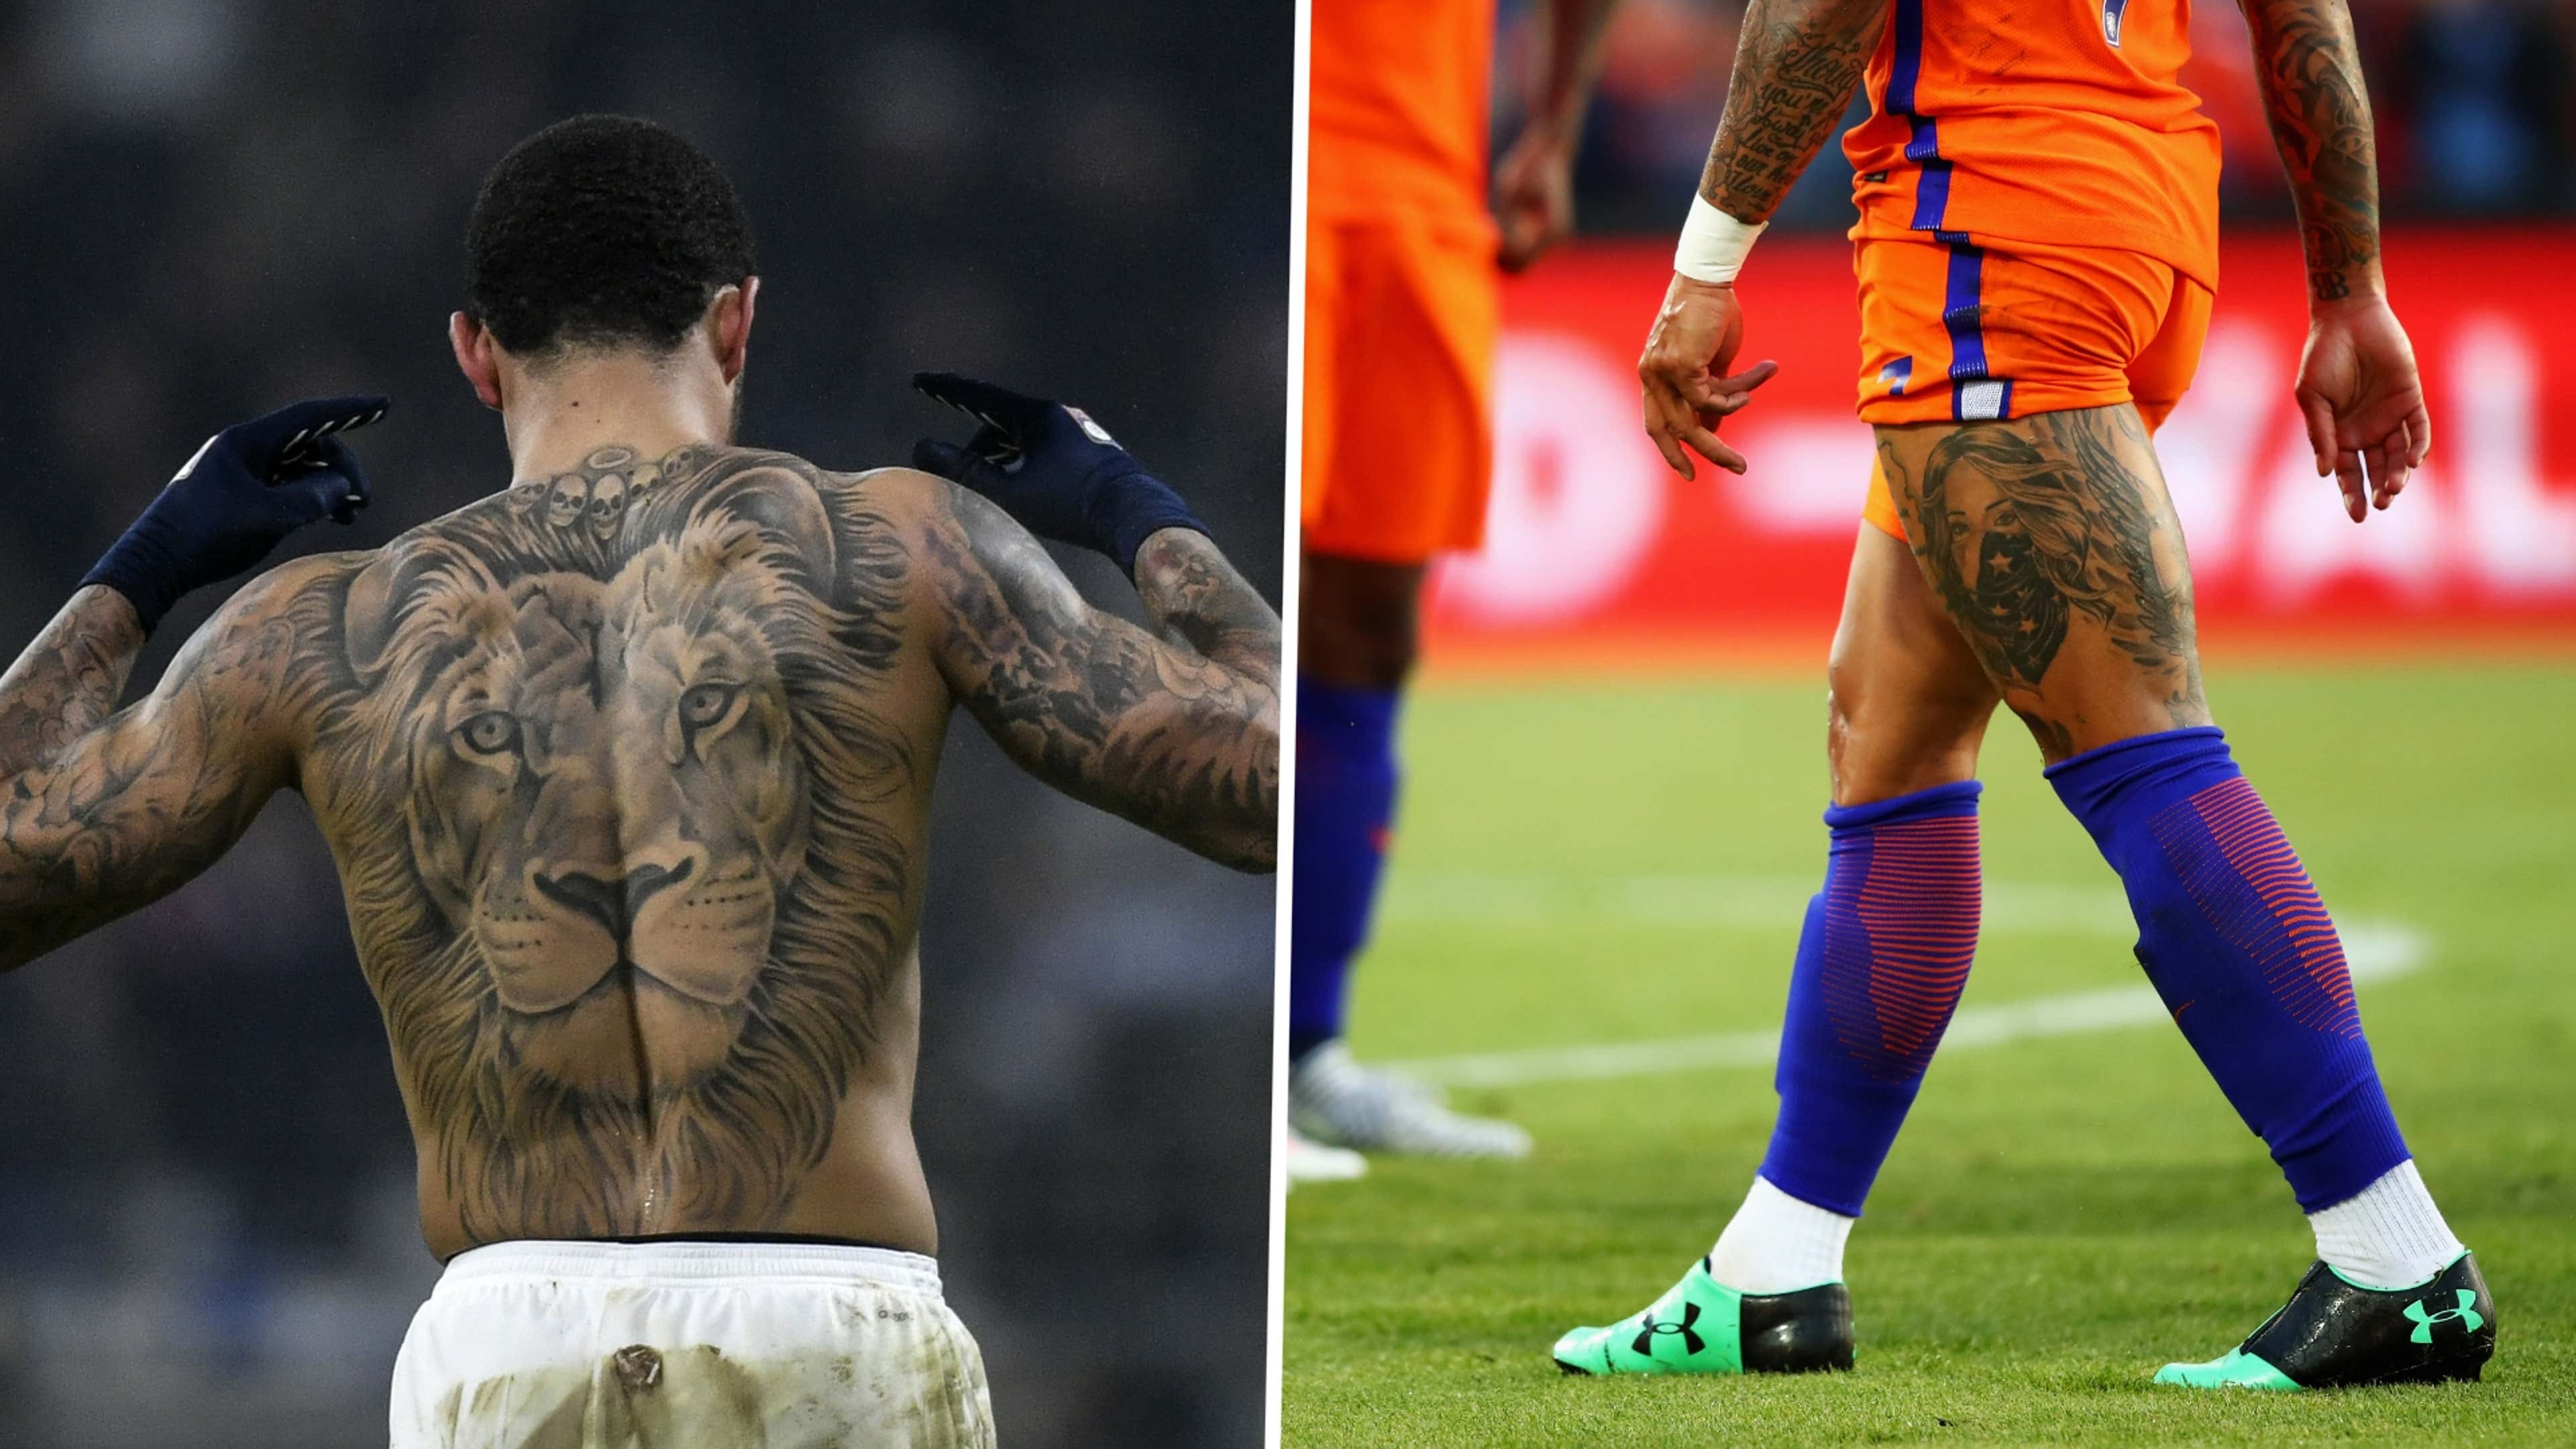 Memphis Depay, Manchester United player, with the coolest tattoo